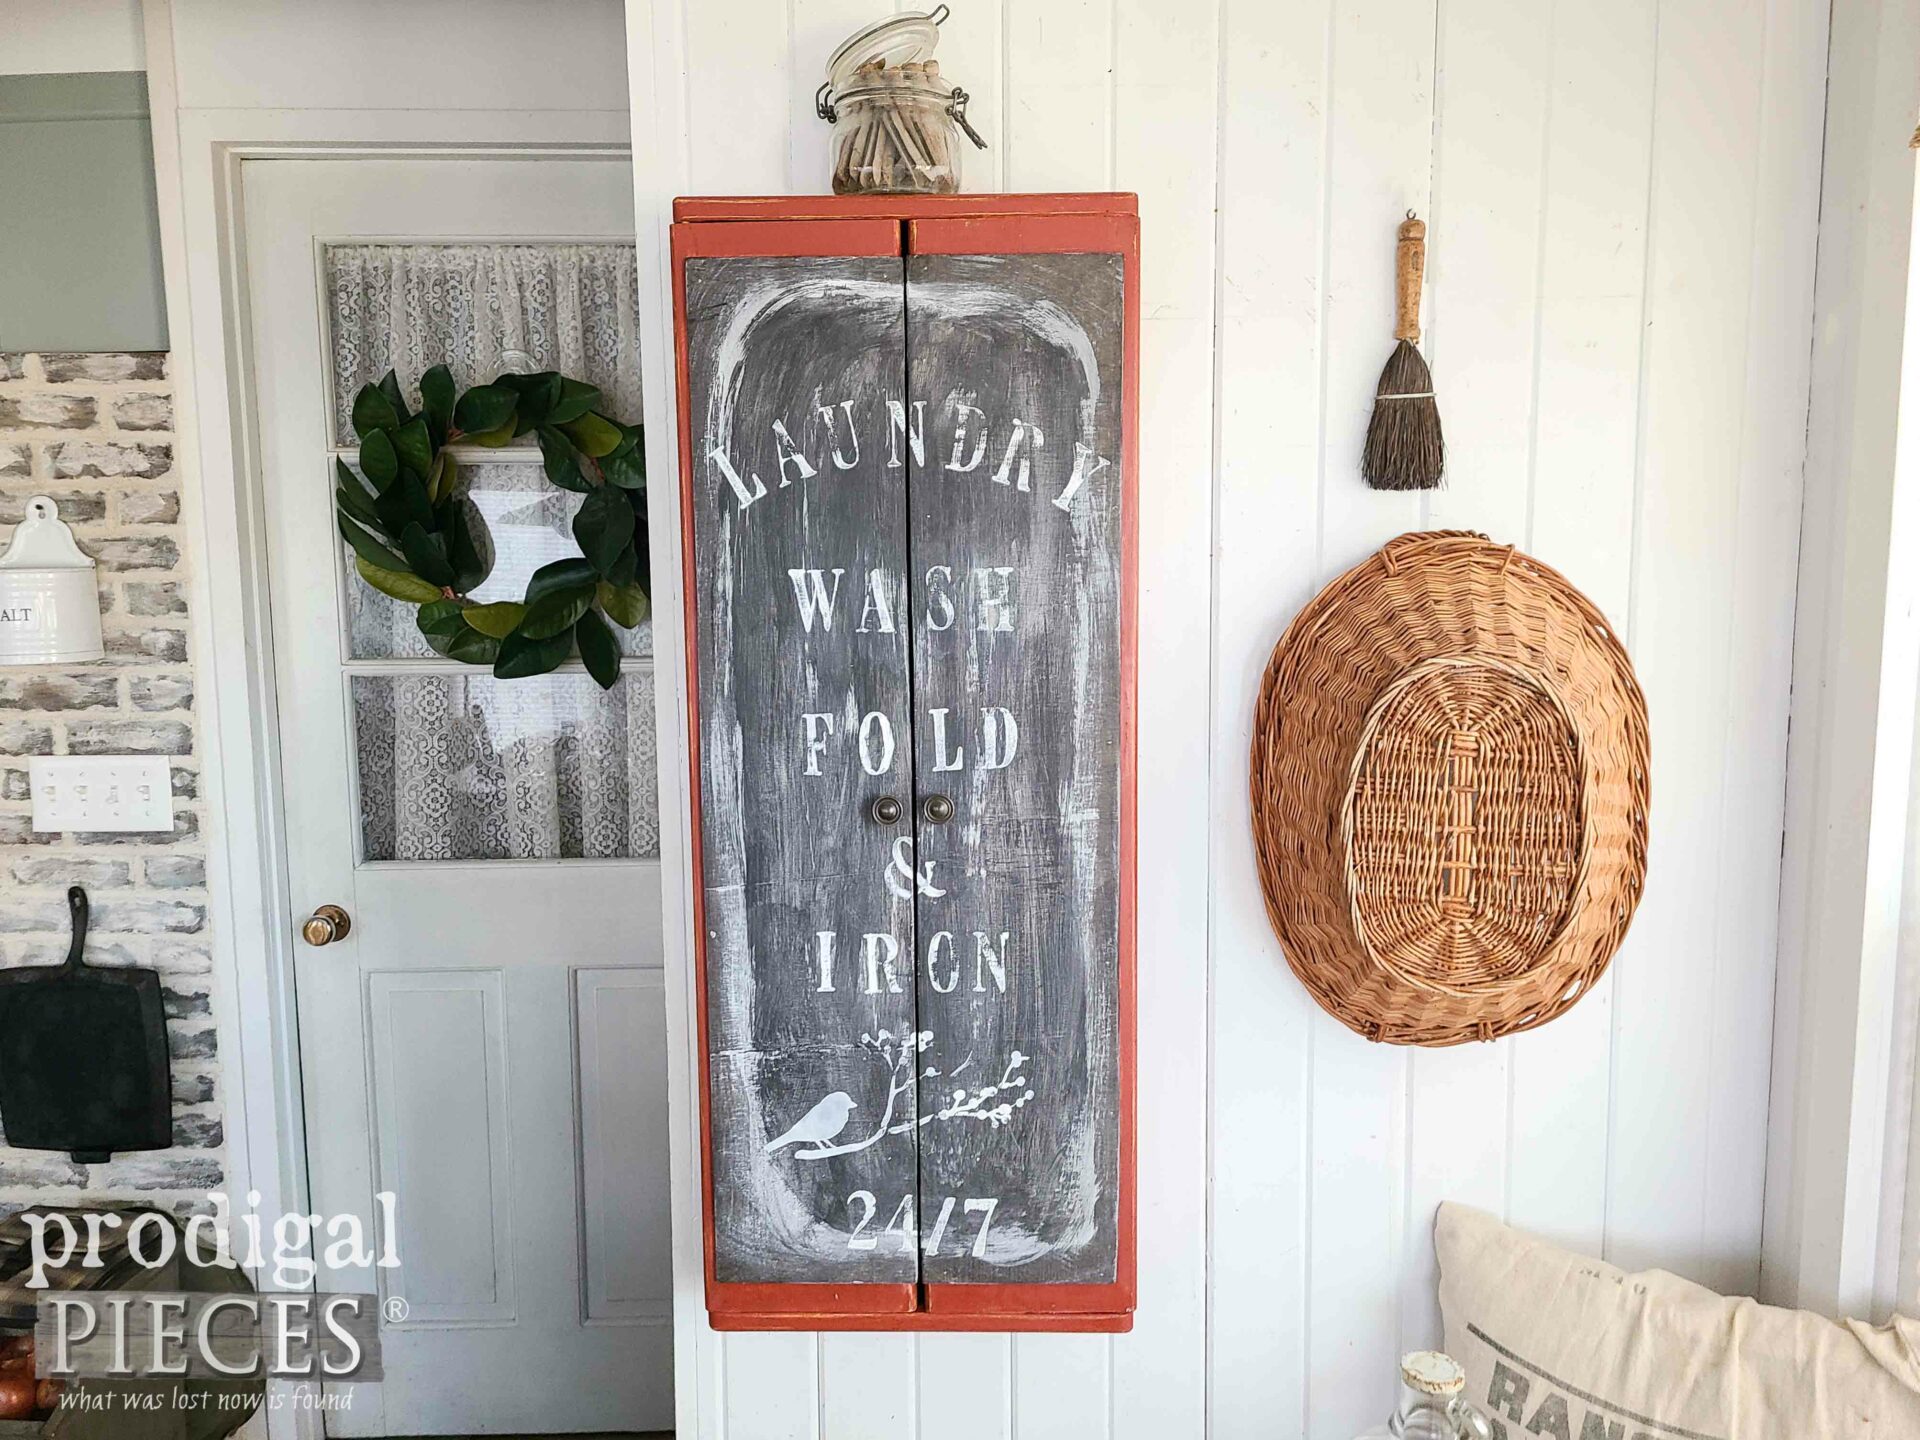 Handmade Farmhouse Ironing Board Cabinet Makeover by Larissa of Prodigal Pieces | prodigalpieces.com #prodigalpieces #farmhouse #laundry